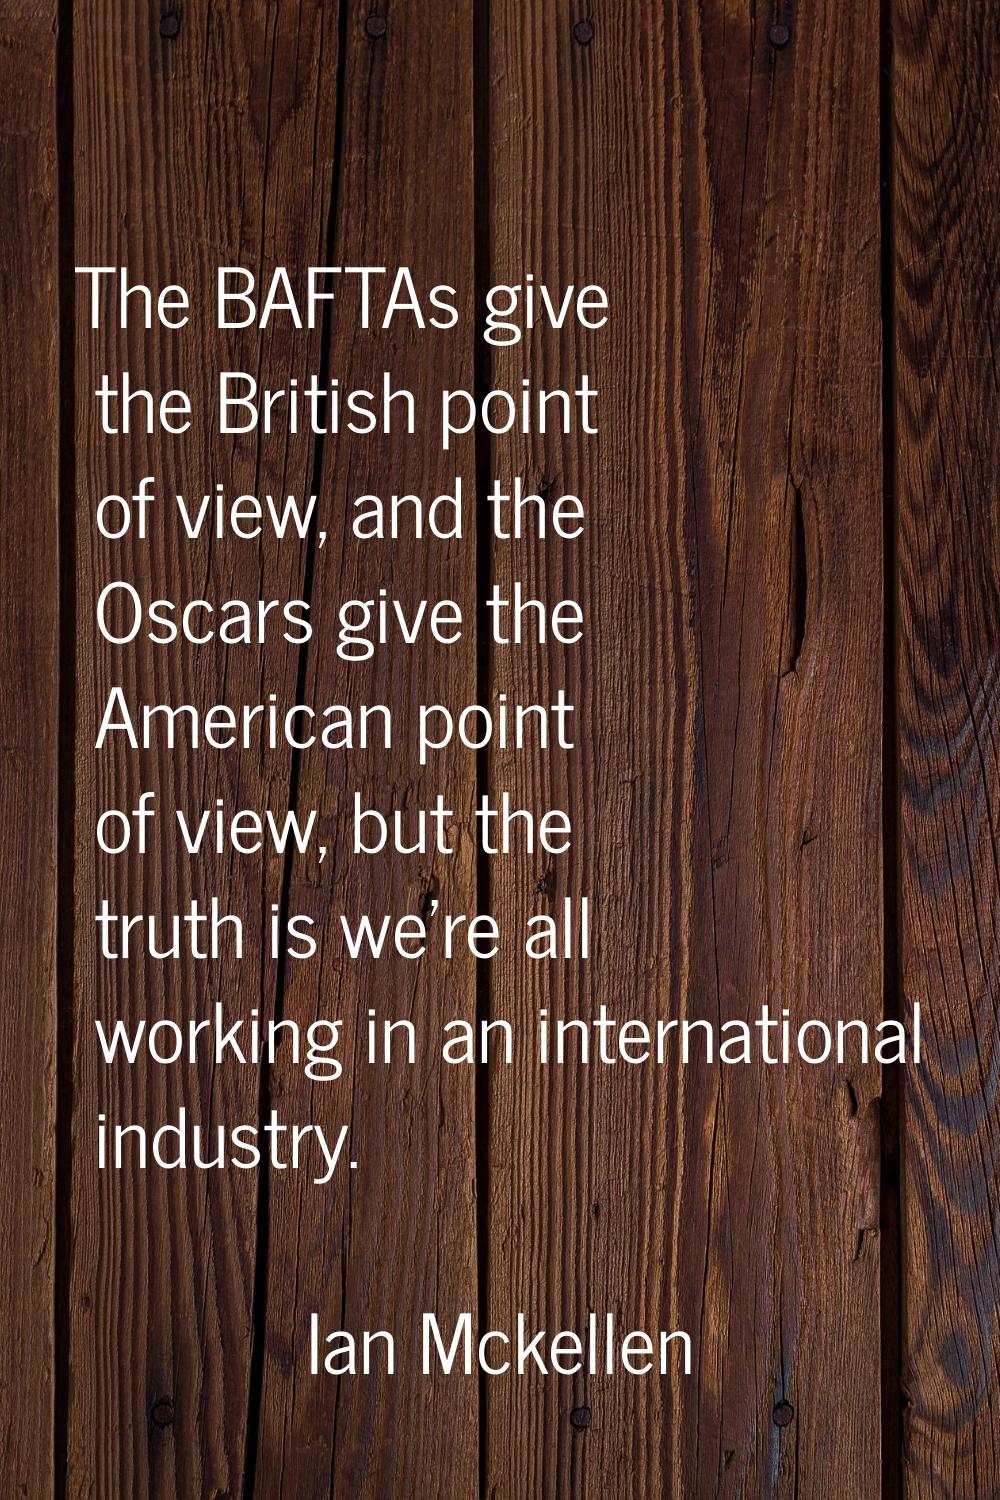 The BAFTAs give the British point of view, and the Oscars give the American point of view, but the 